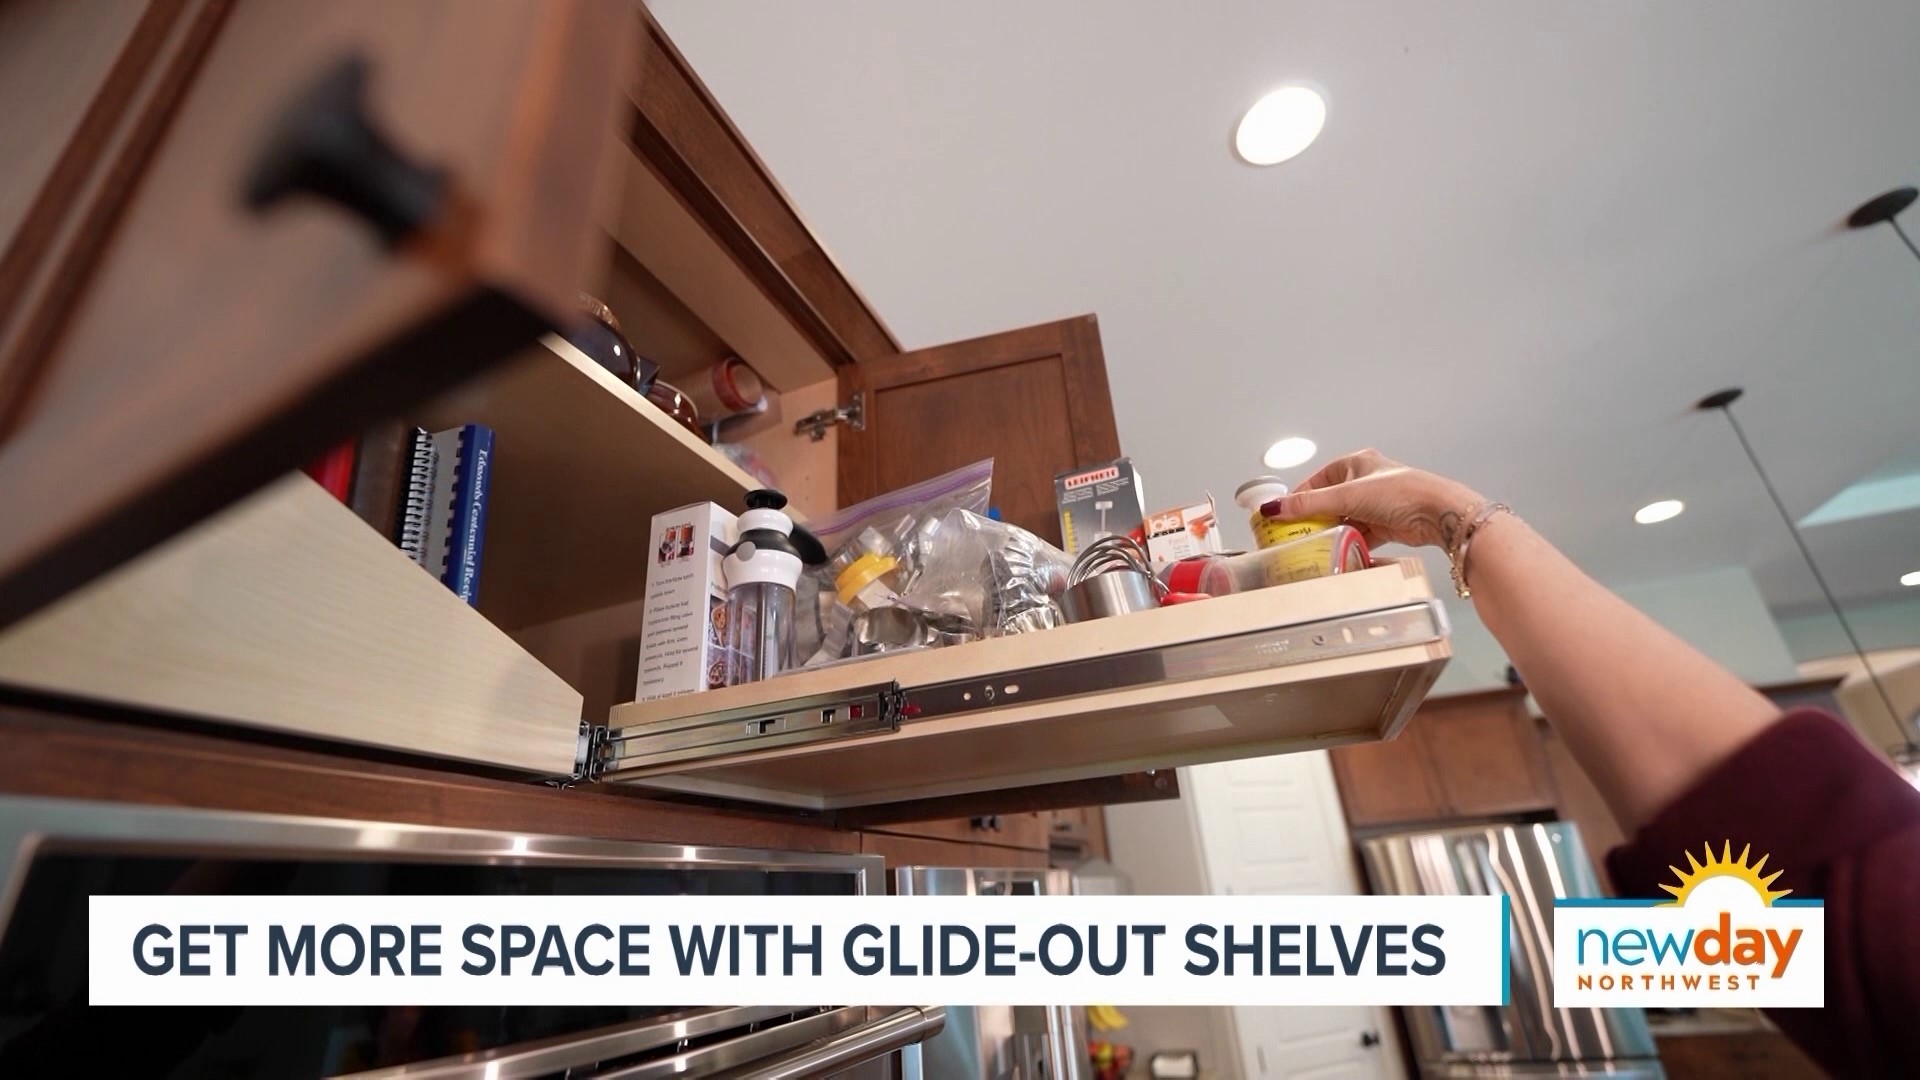 ShelfGenie of Seattle has custom glide-out shelving to help organize your cabinets and maximize your storage space. Sponsored by ShelfGenie.